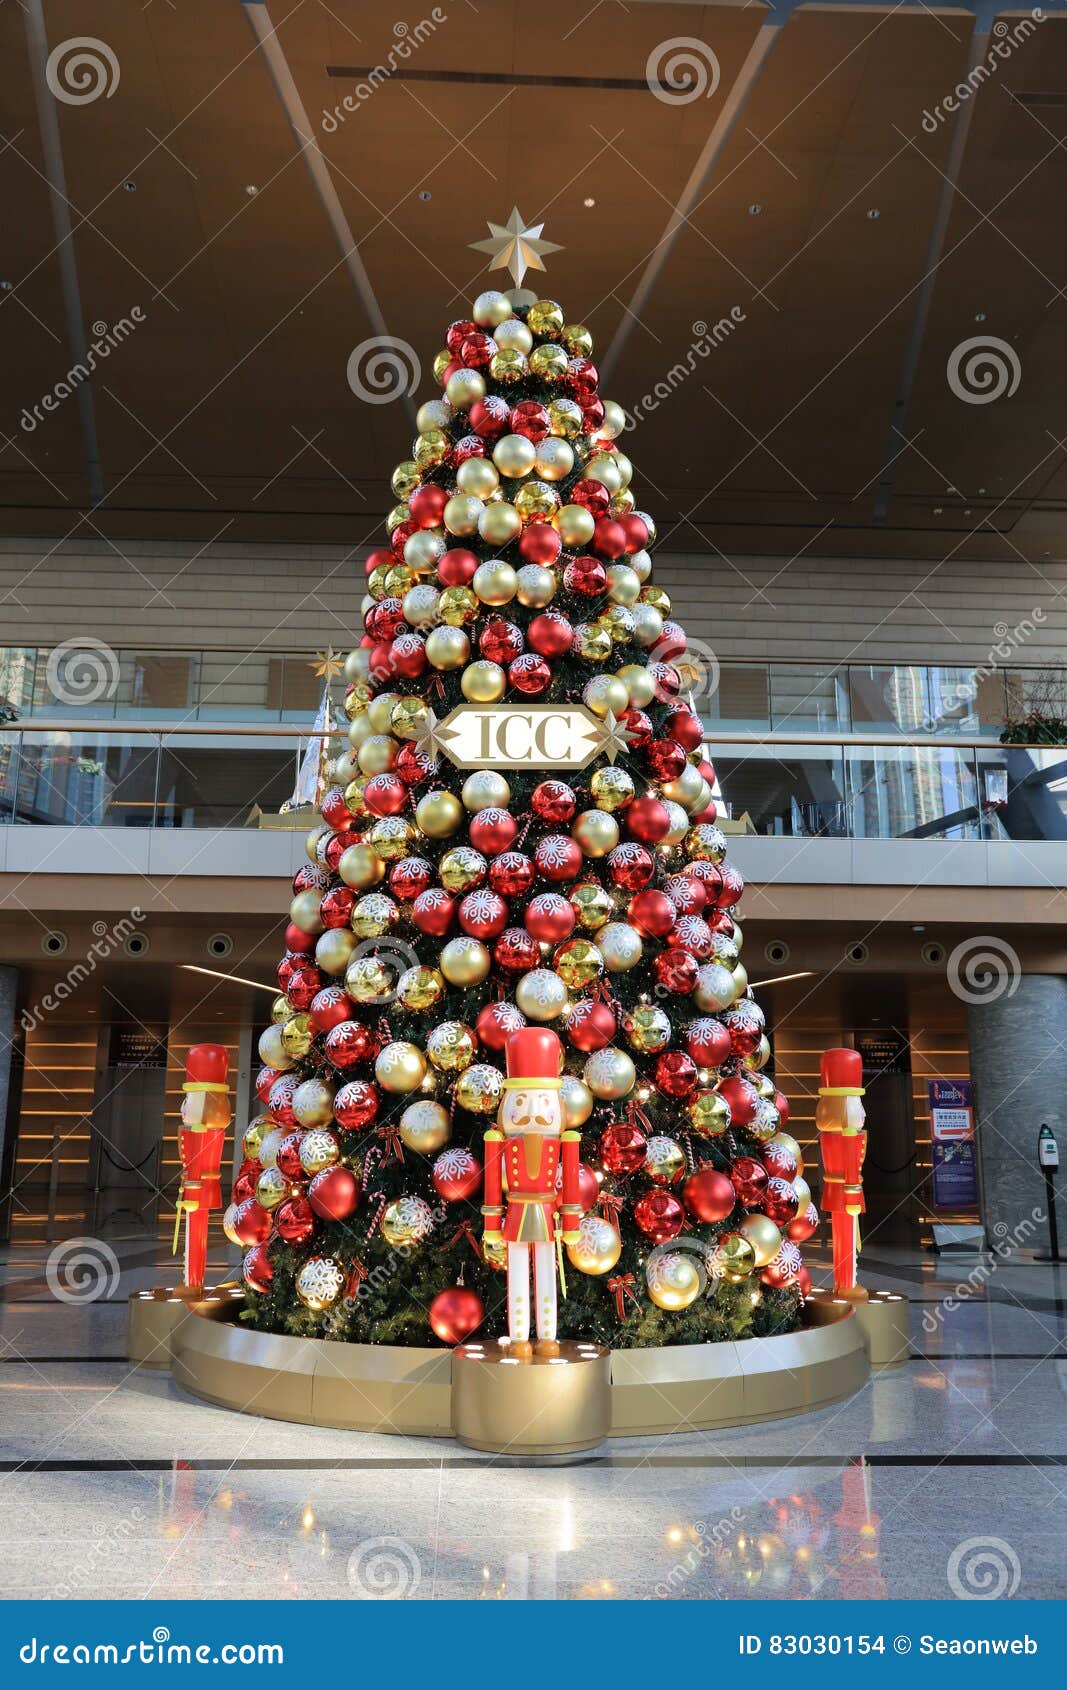 Christmas tree in mall. A massive decorated christmas tree in a suburban  mall. | CanStock